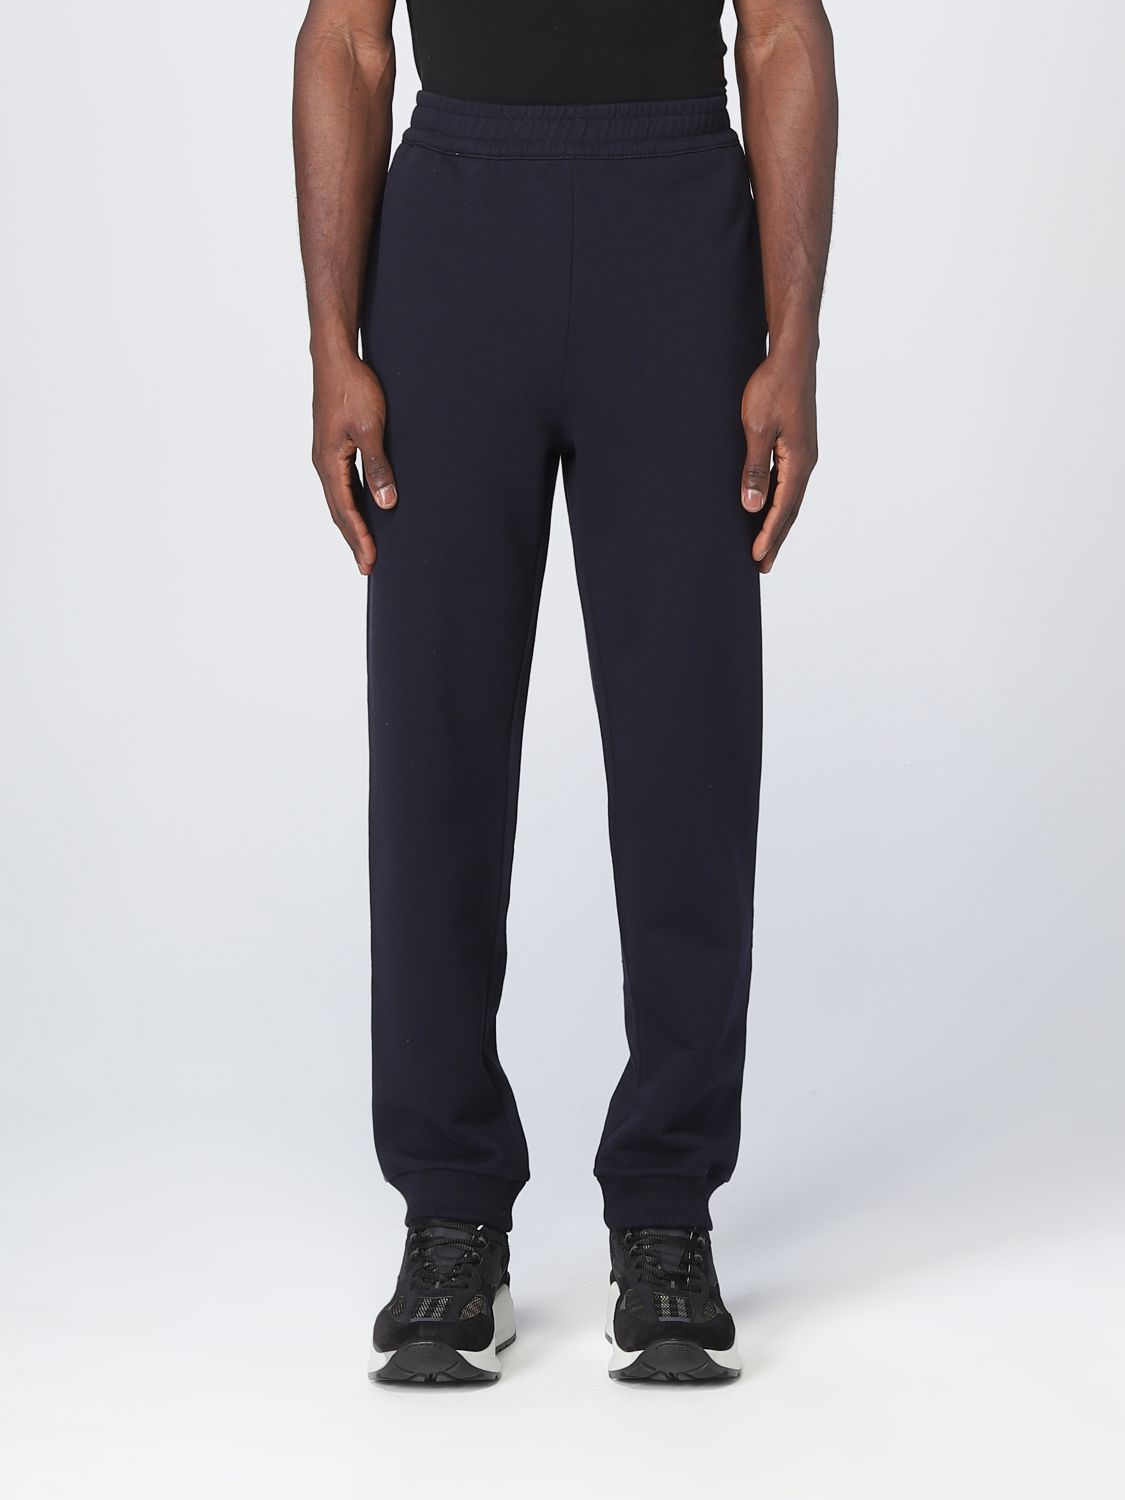 BURBERRY: pants for man - Black | Burberry pants 8065478 online on ...